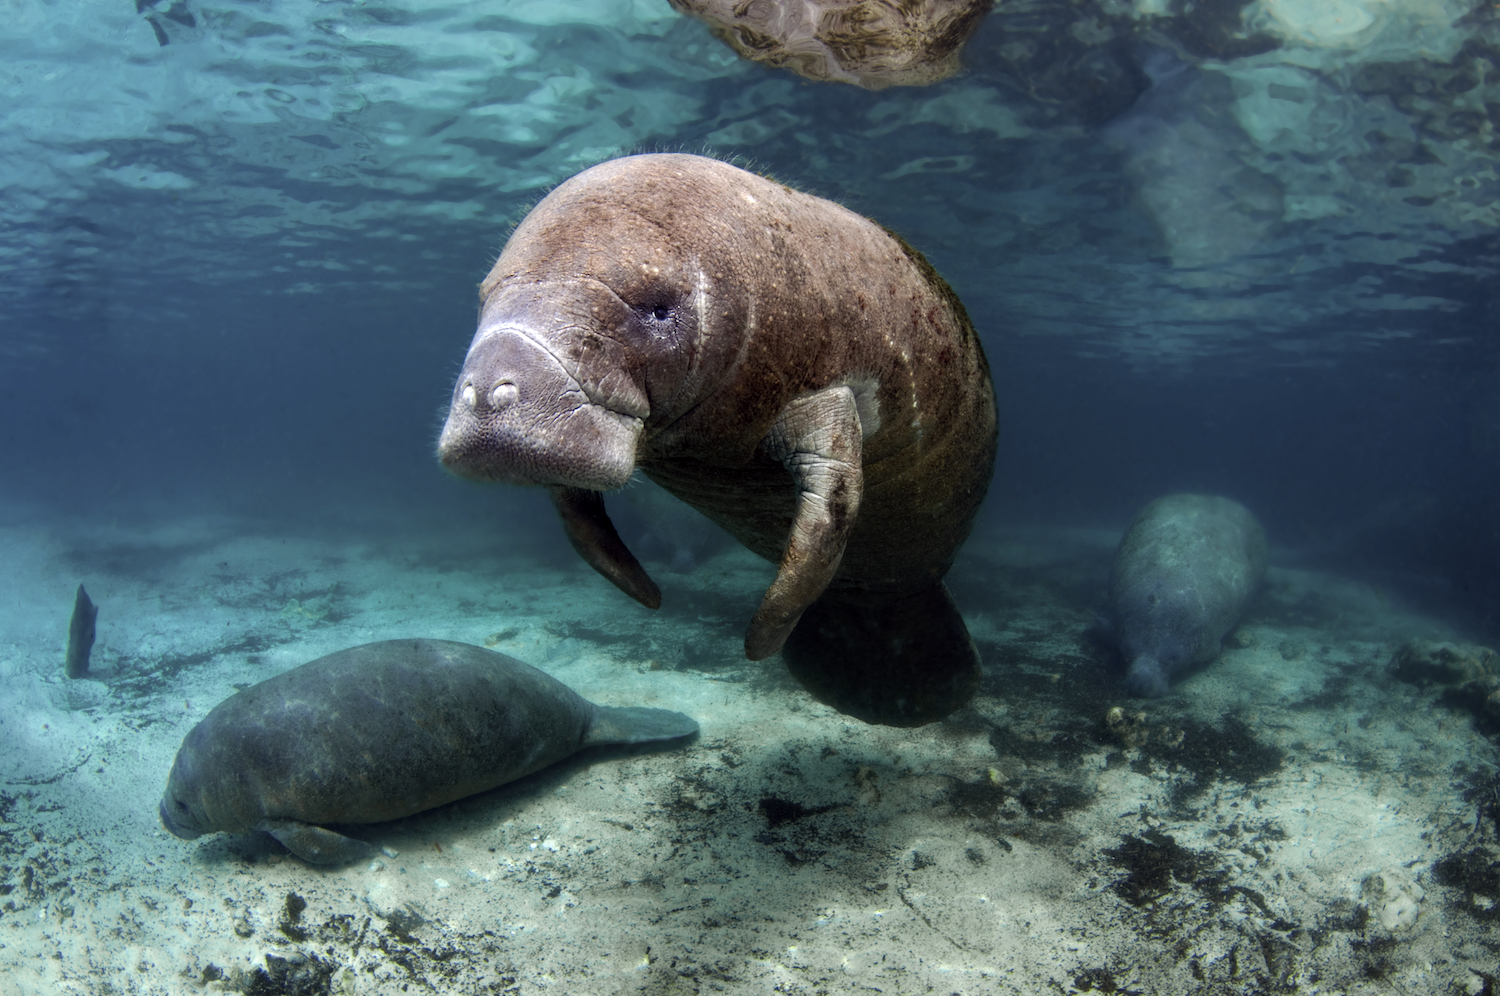 Three manatees in Crystal River, Florida, where you can enjoy the best marine life encounters with these gentle mammals